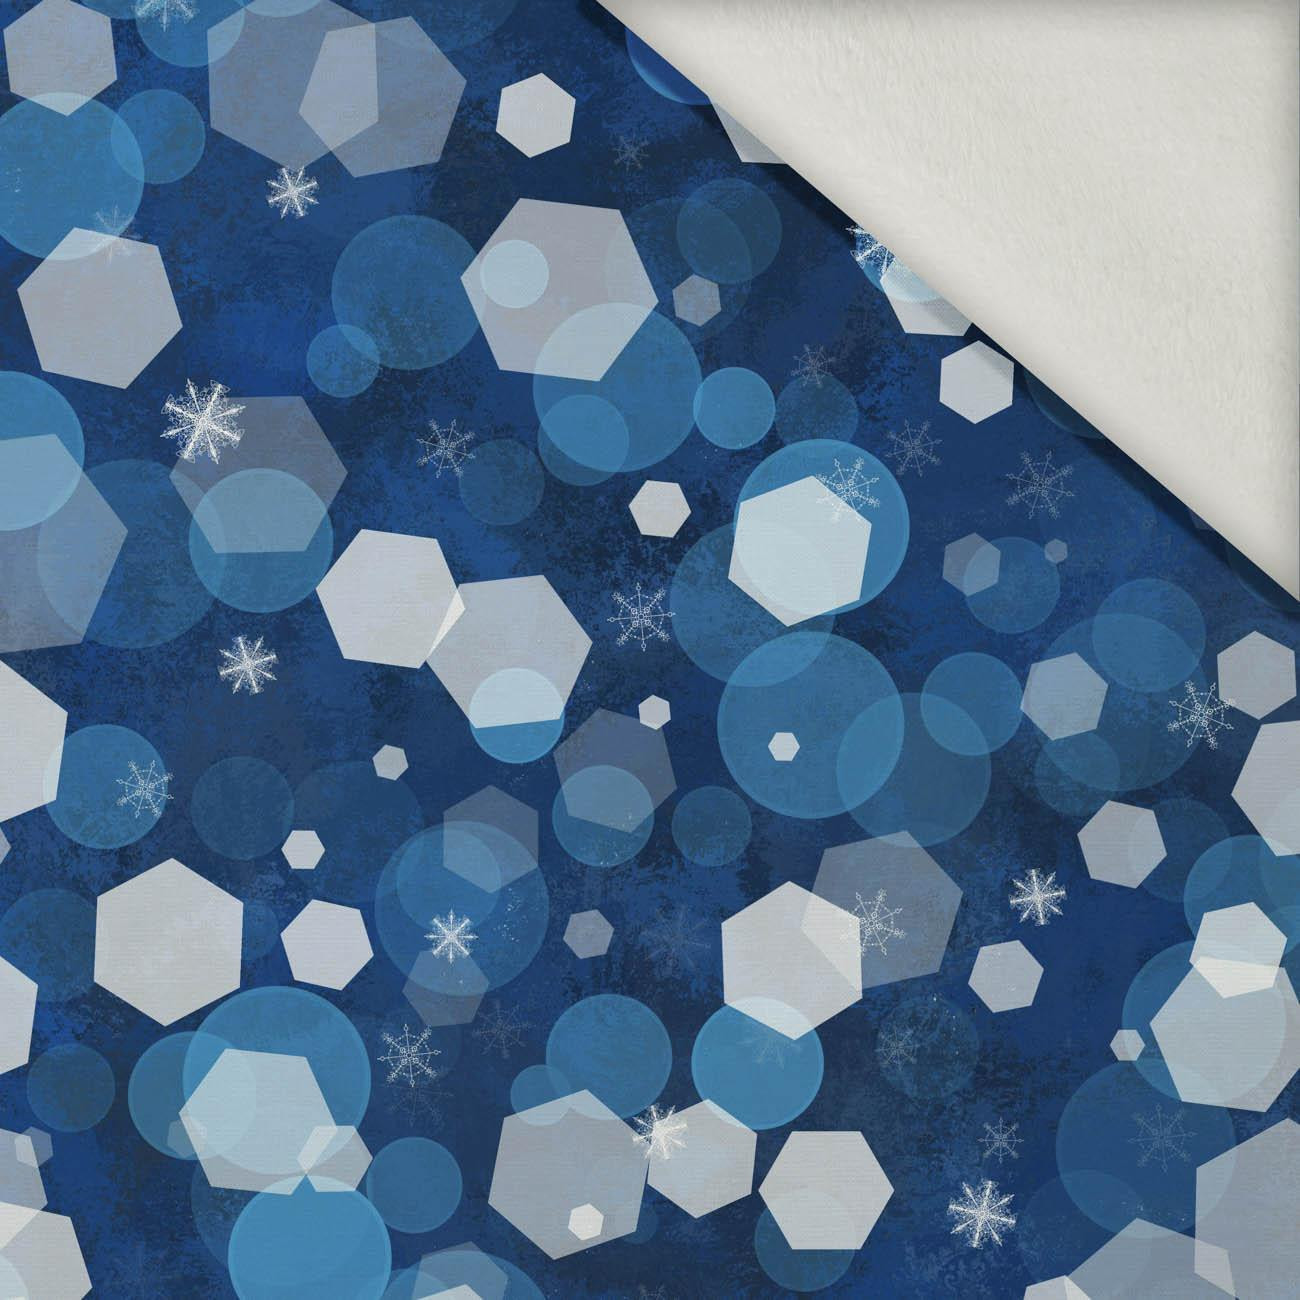 WINTER HEXAGON (WINTER IS COMING) - brushed knit fabric with teddy / alpine fleece